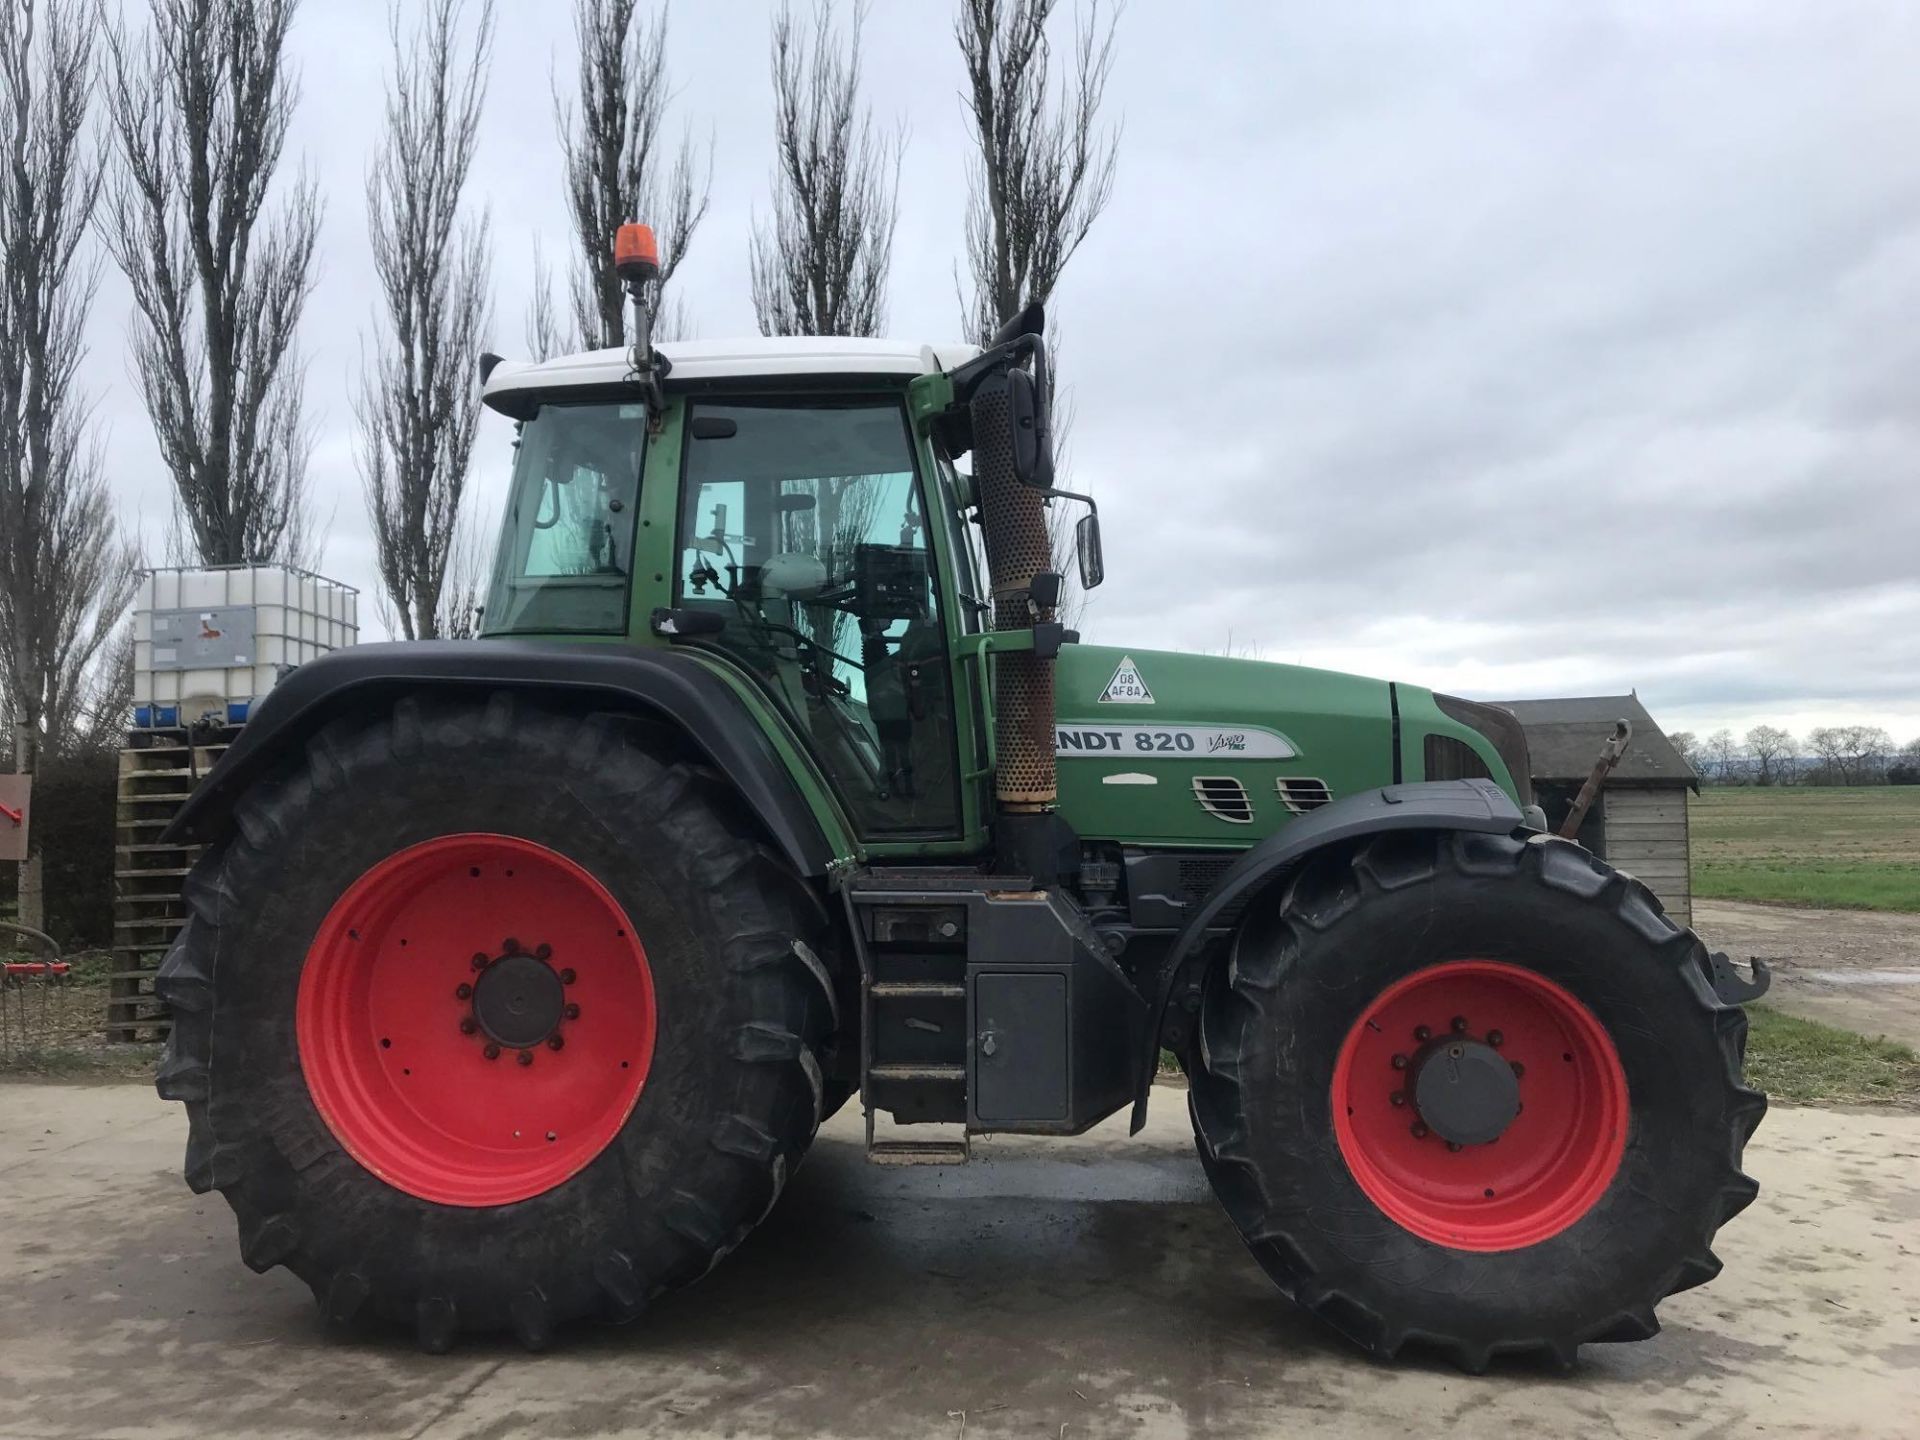 2010 Fendt 820 Vario TMS tractor, 4wd, front linkage, 4No spool valves, Bill Bennett pick up hitch. - Image 4 of 21